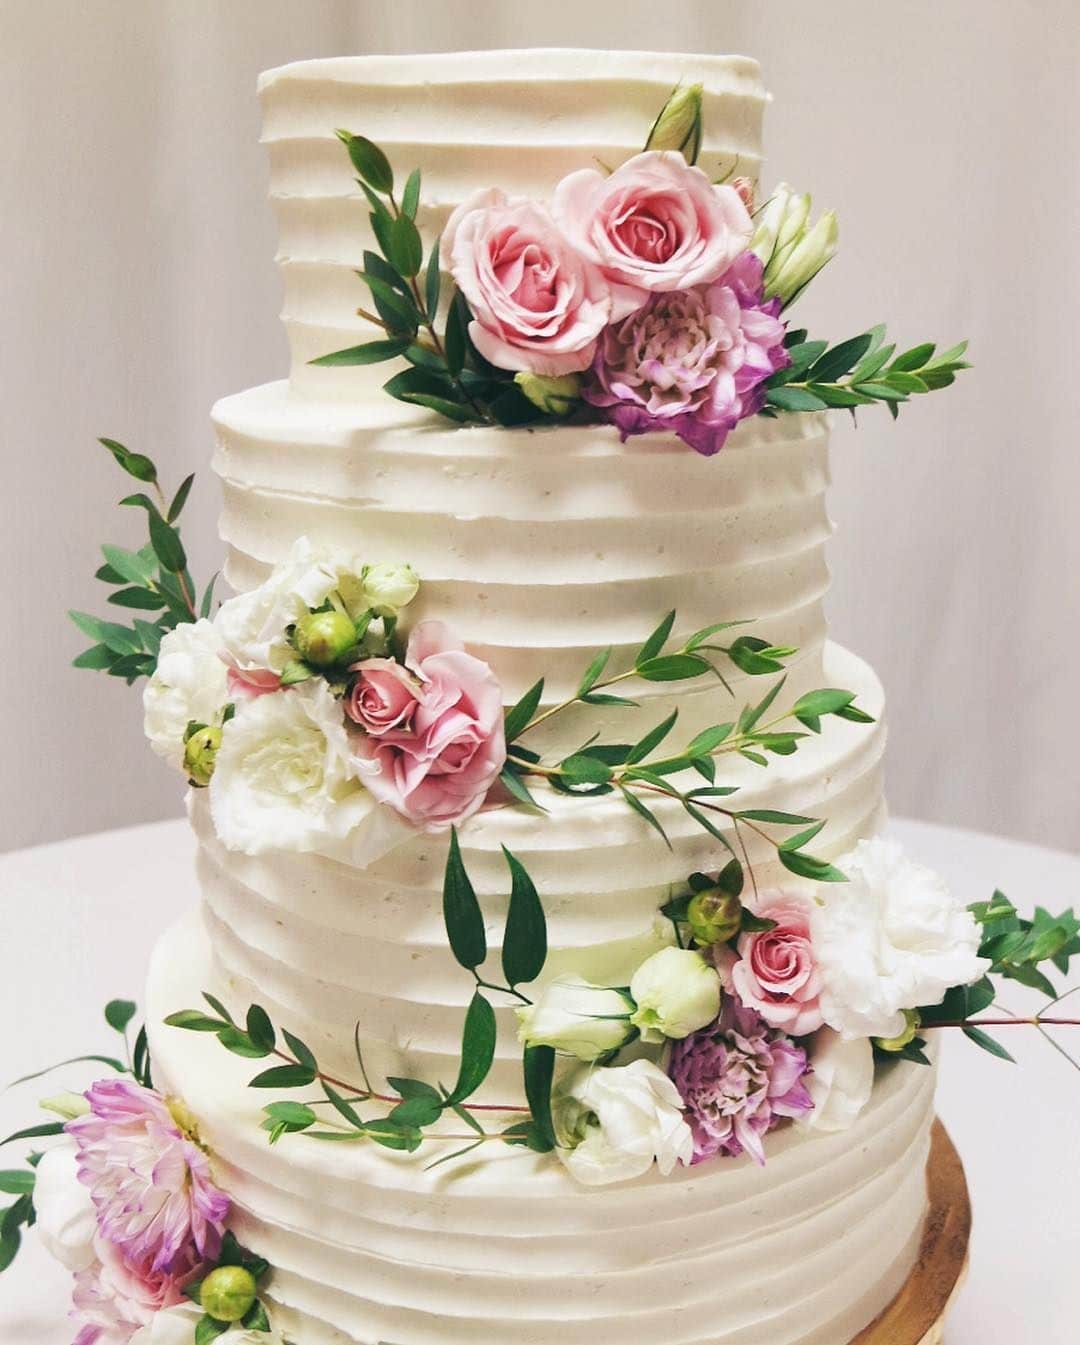 How Much Does A Traditional Wedding Cake Cost